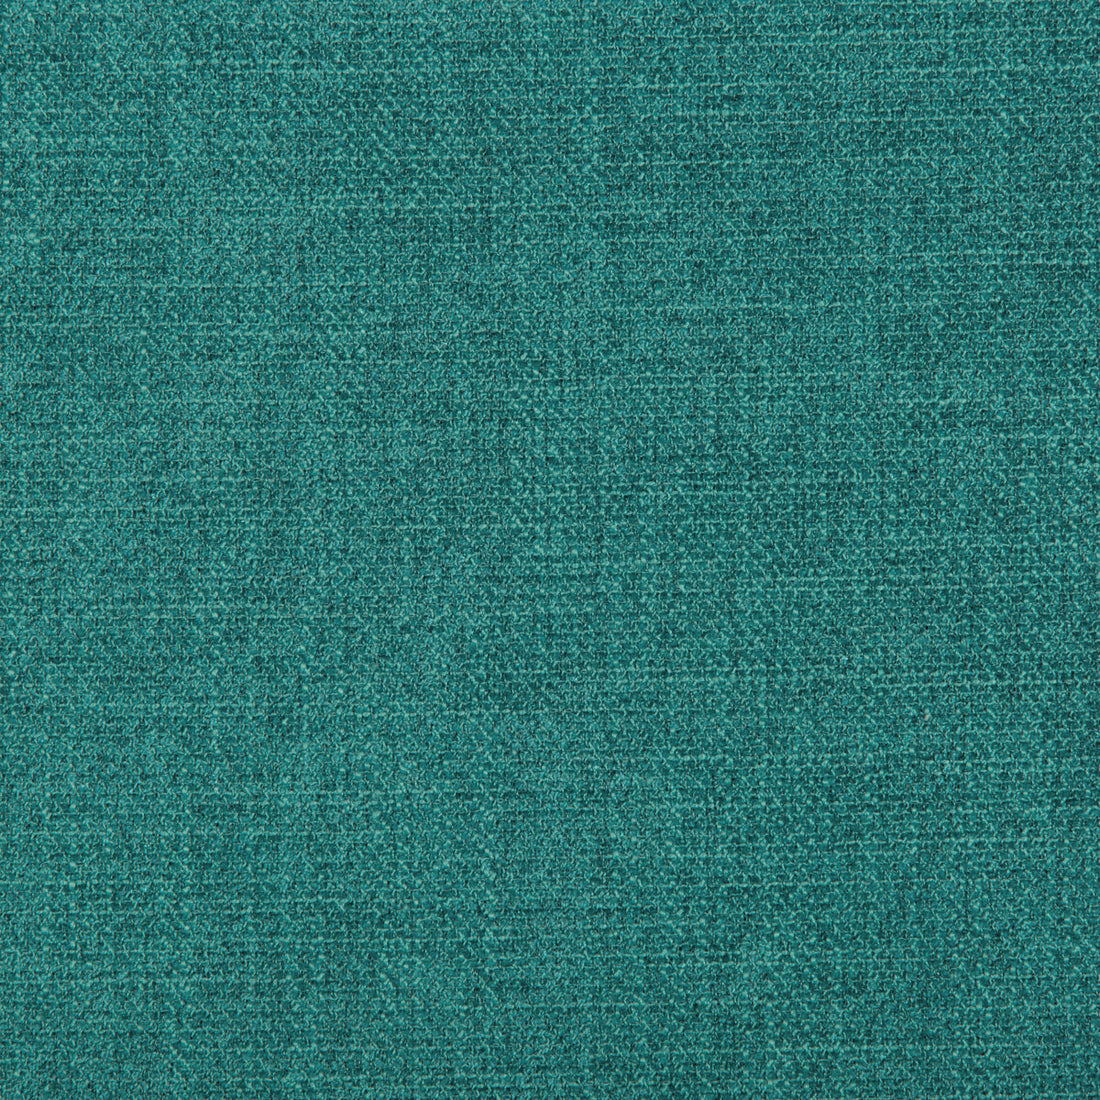 Kravet Contract fabric in 35404-35 color - pattern 35404.35.0 - by Kravet Contract in the Crypton Incase collection